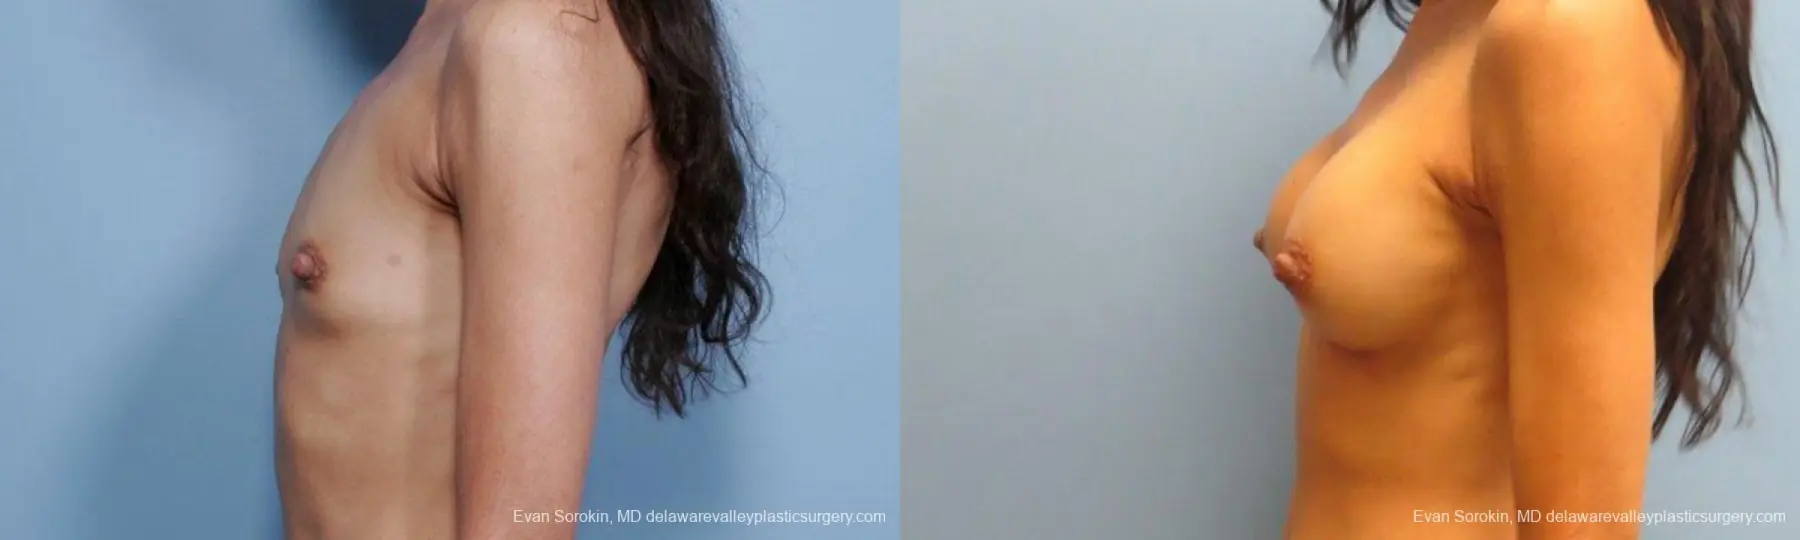 Philadelphia Breast Augmentation 9424 - Before and After 5